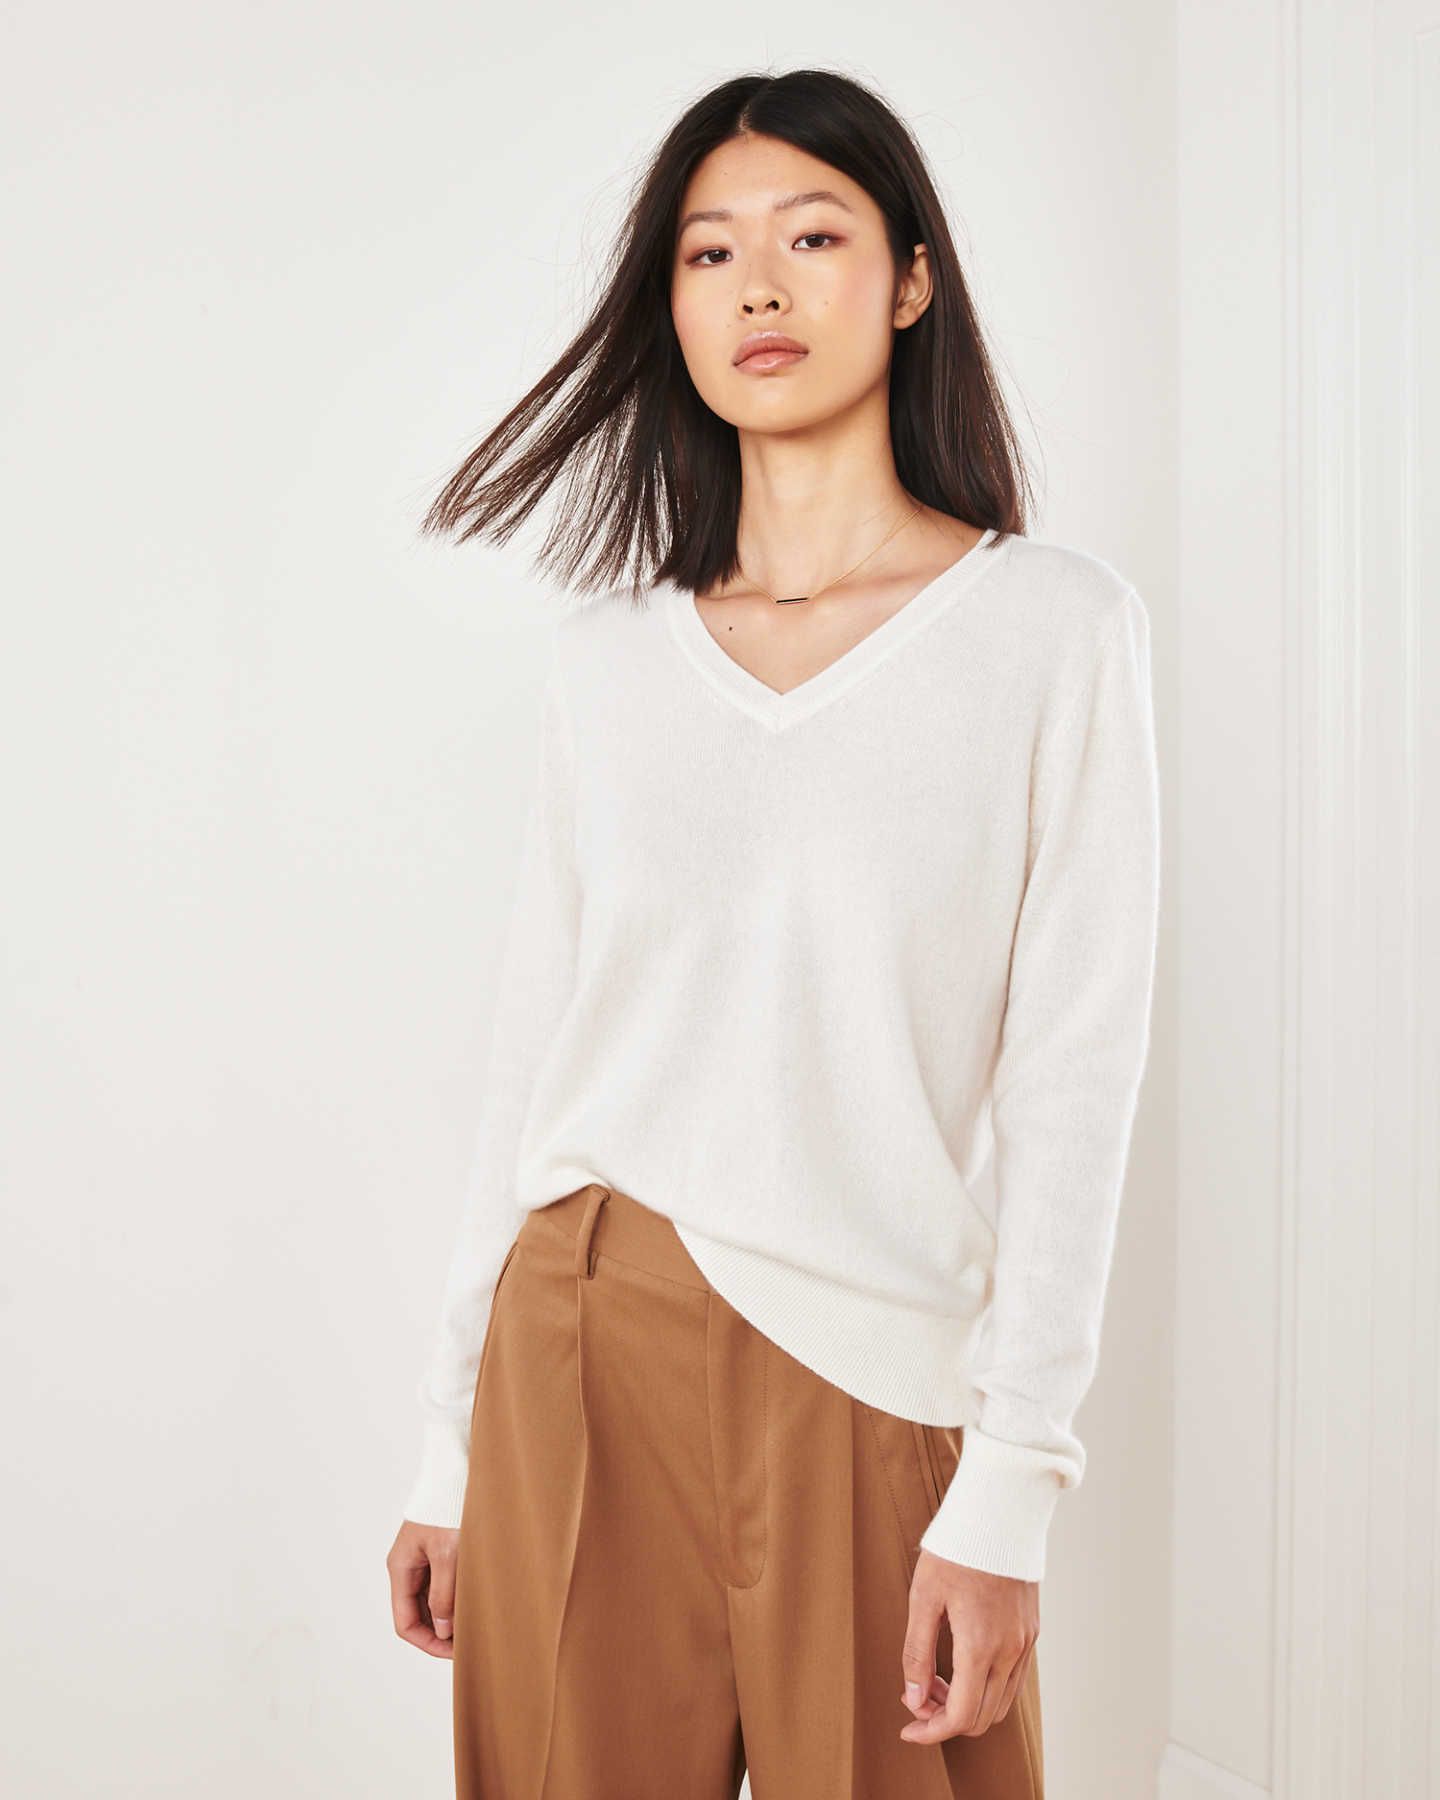 The $50 Cashmere V-Neck Sweater | Quince | Quince